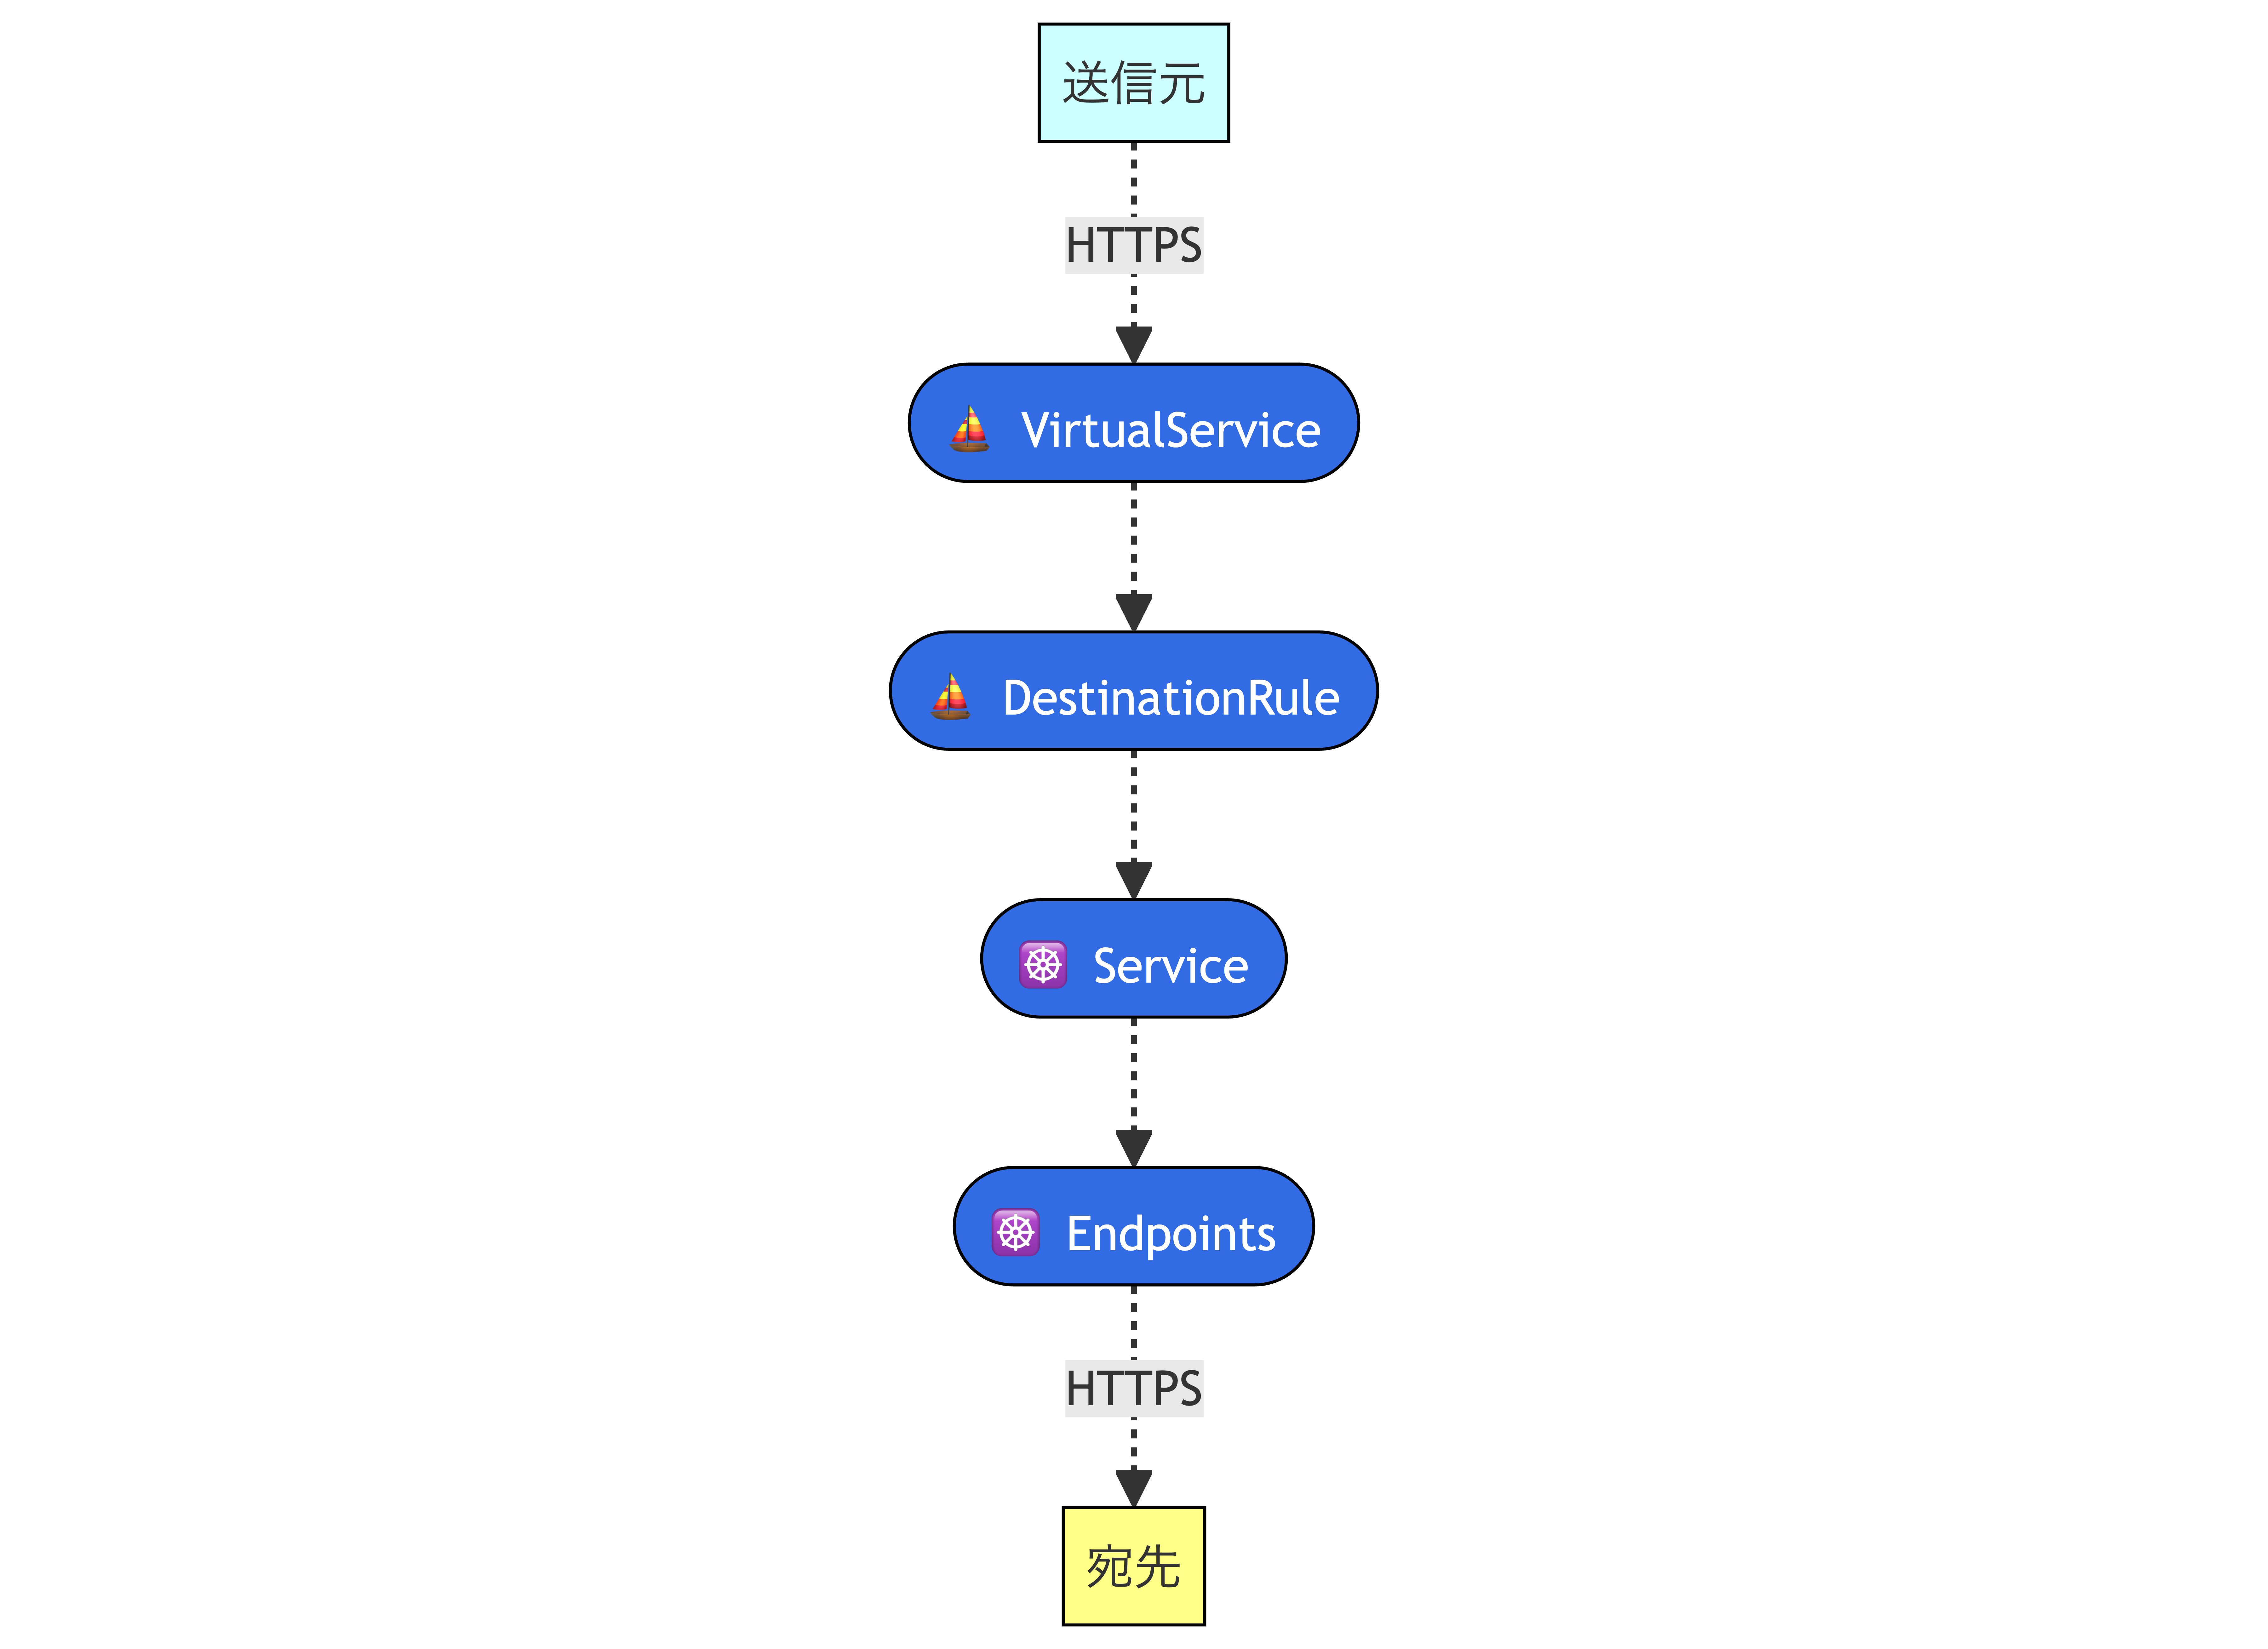 istio_envoy_istio_resource_service-to-service_mermaid.png